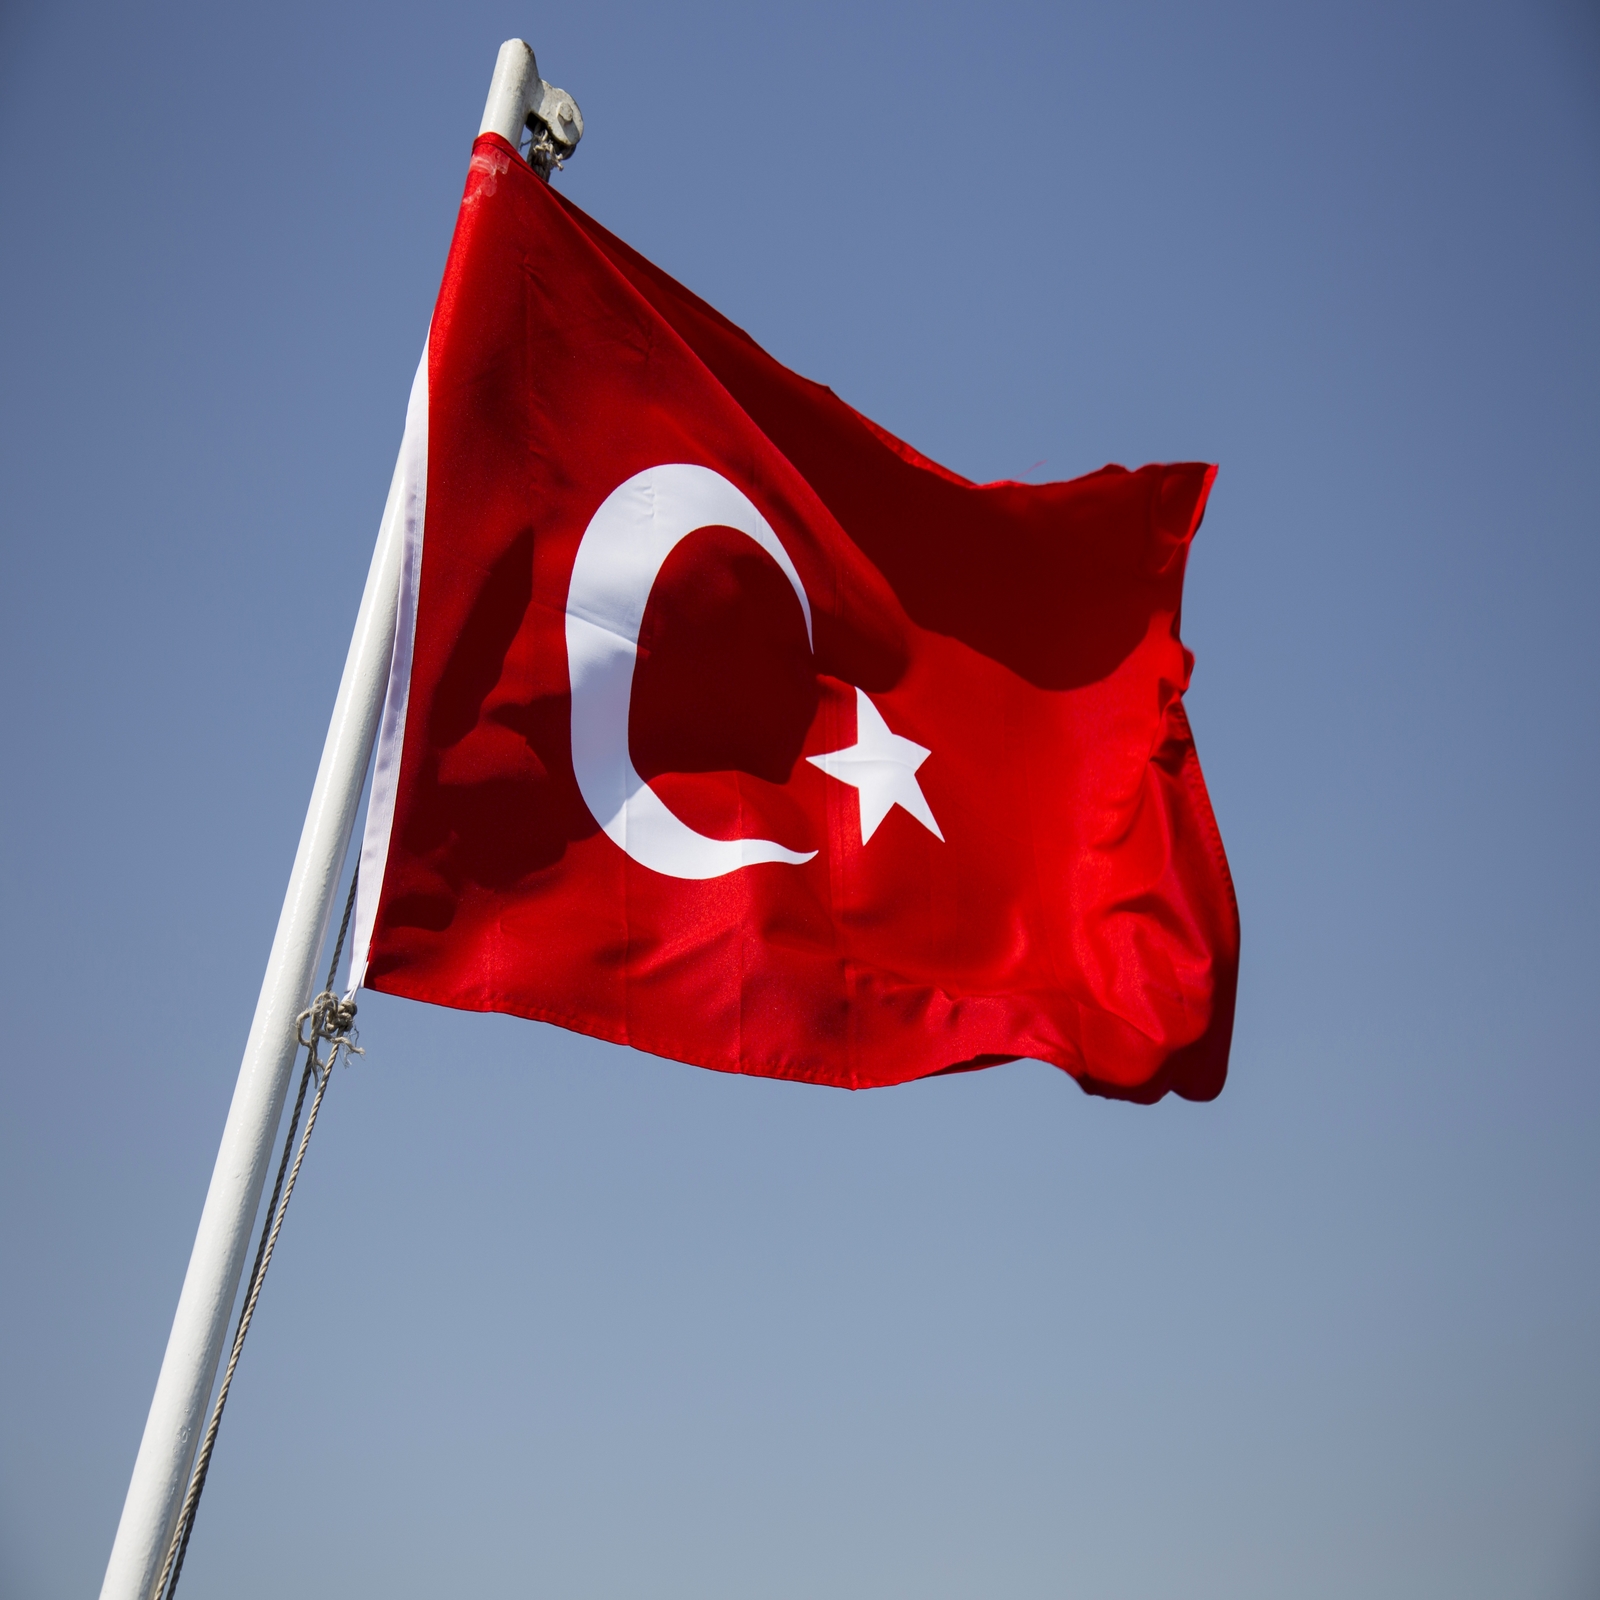 Police Bust Turkish Gang That Kidnapped Wealthy Bitcoin Holders